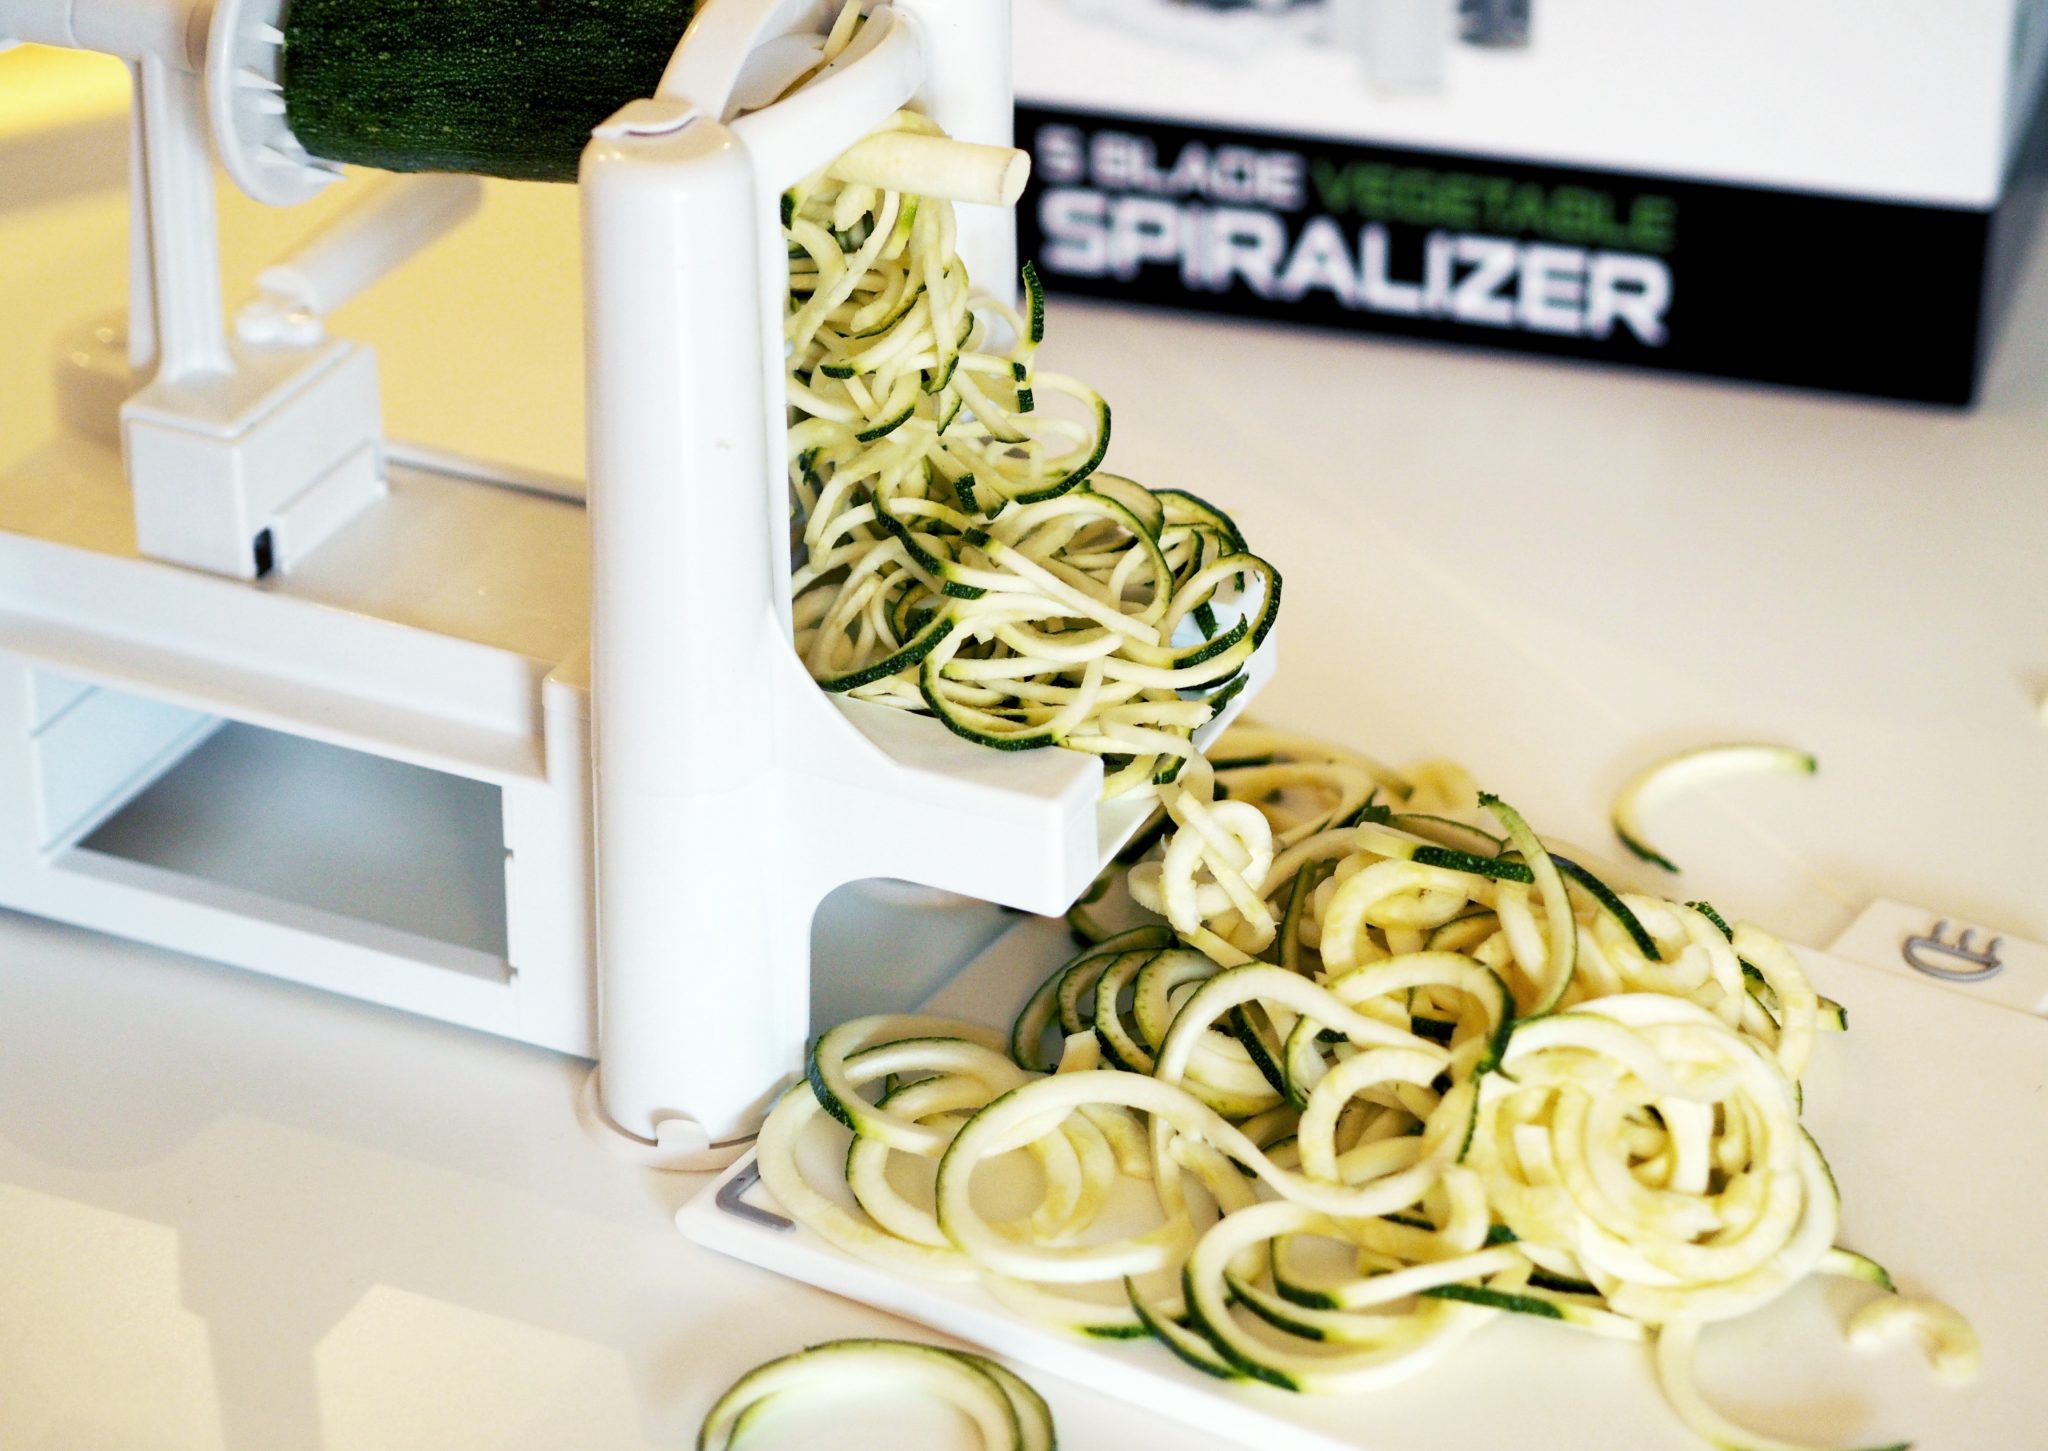 Manchester lifestyle blogger - spiralizer review and recipe